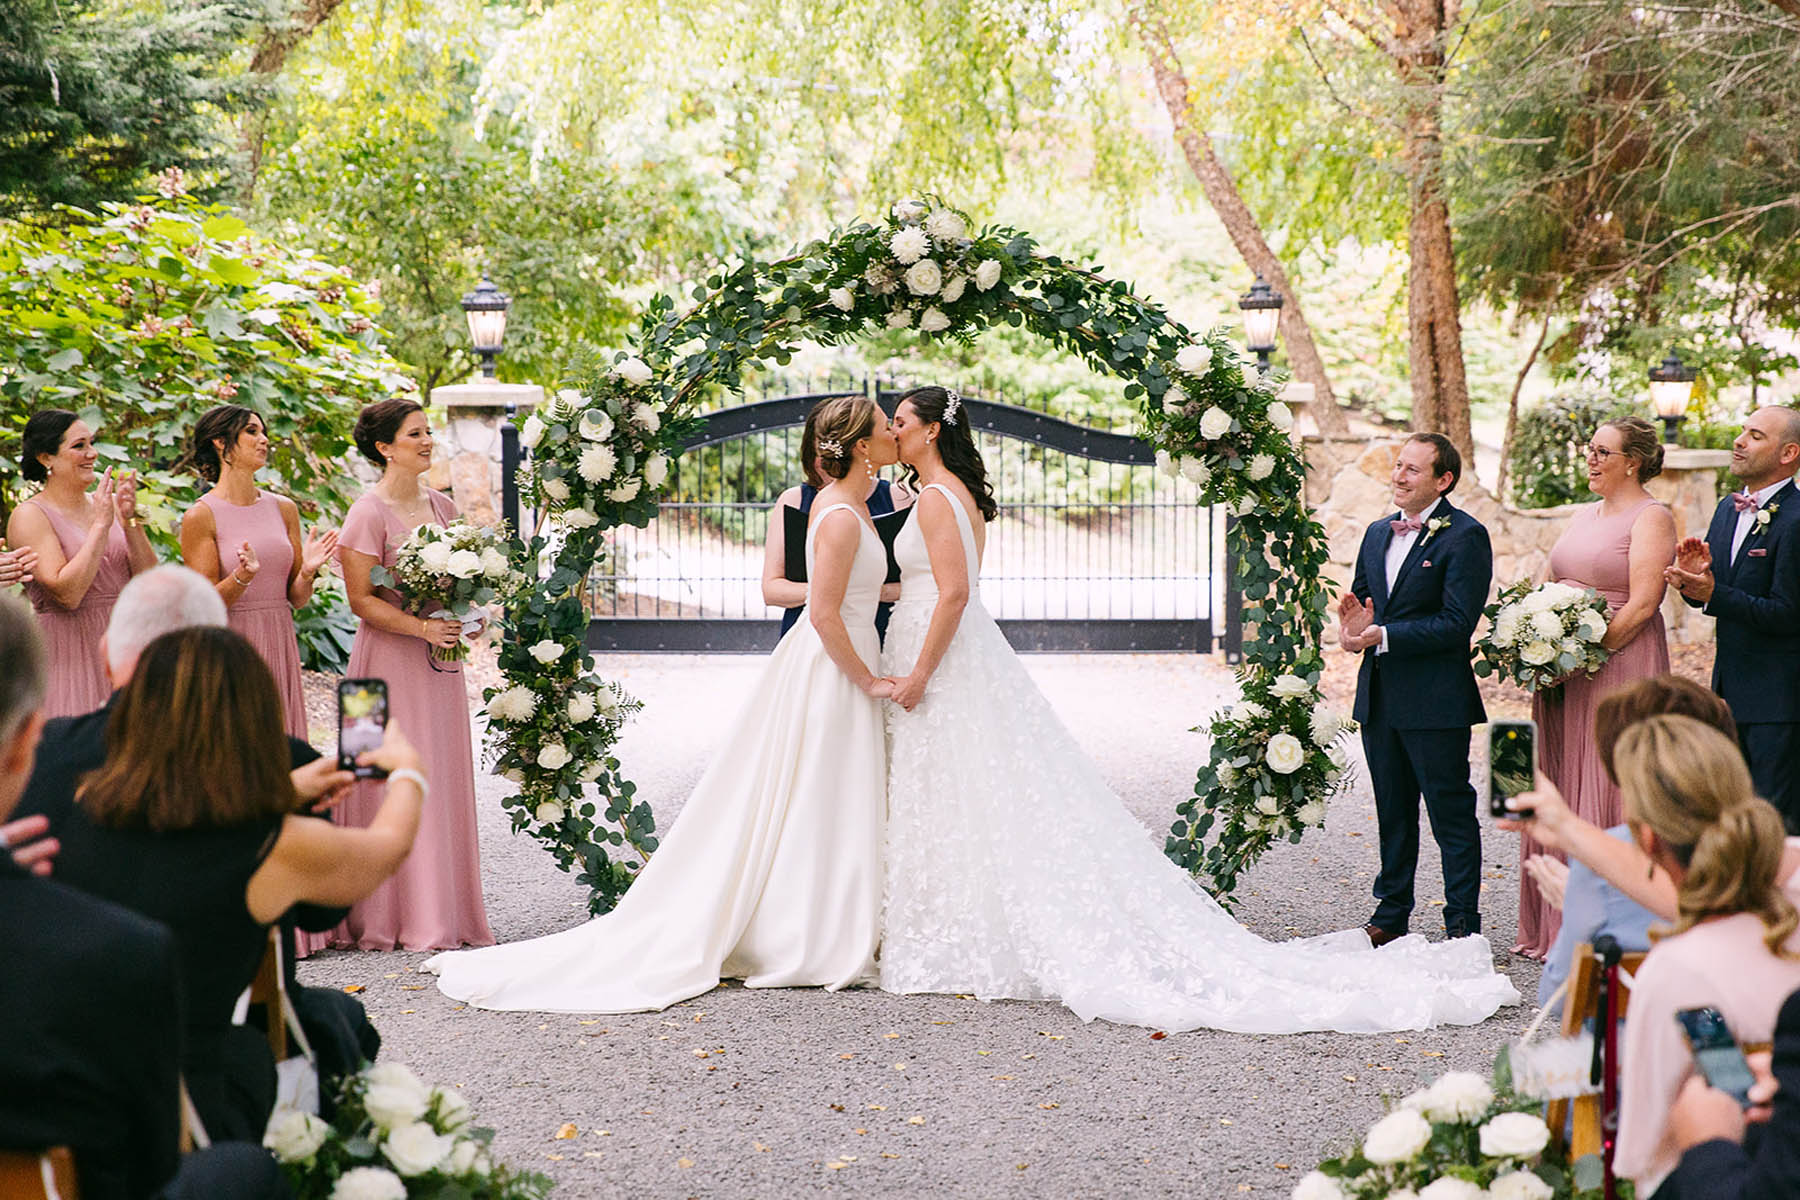 Two brides, one brunette and one blonde, stand in front of a round floral arbor, kissing.